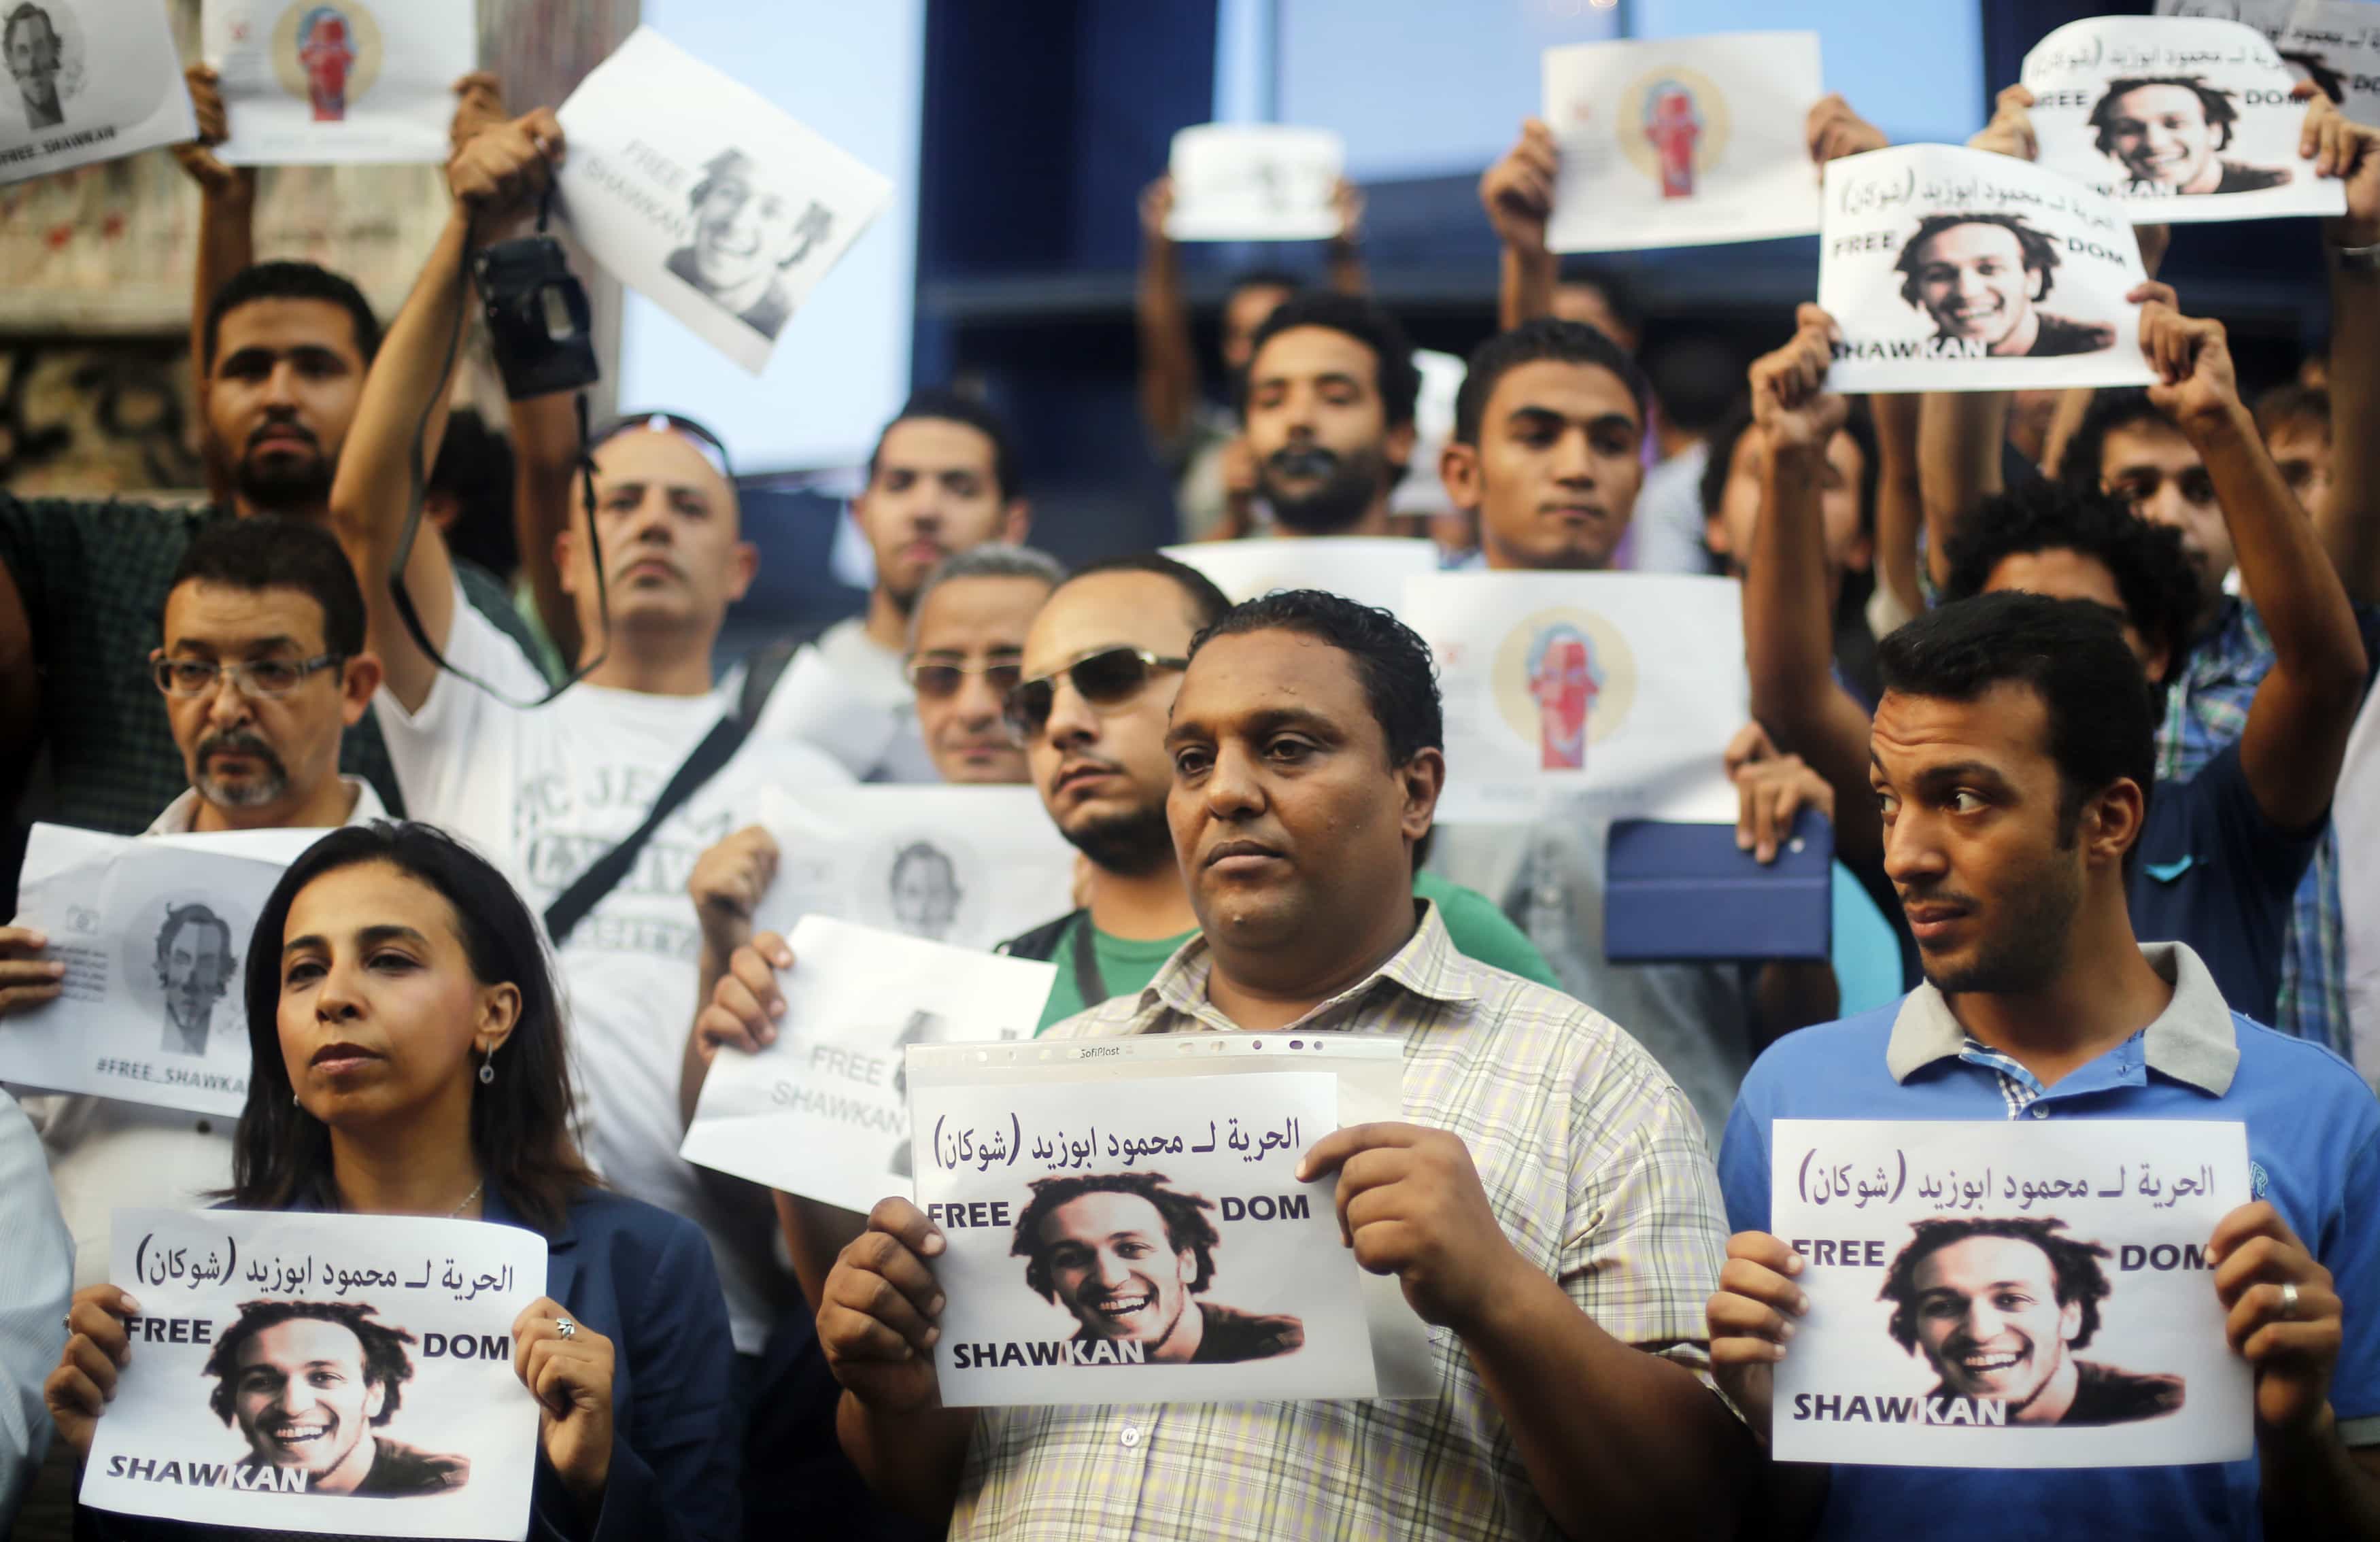 Egyptian photojournalists hold up placards as they take part in a silent protest against the detention of fellow photojournalist Abou Zeid, in Cairo, July 12, 2014, REUTERS/Amr Abdallah Dalsh